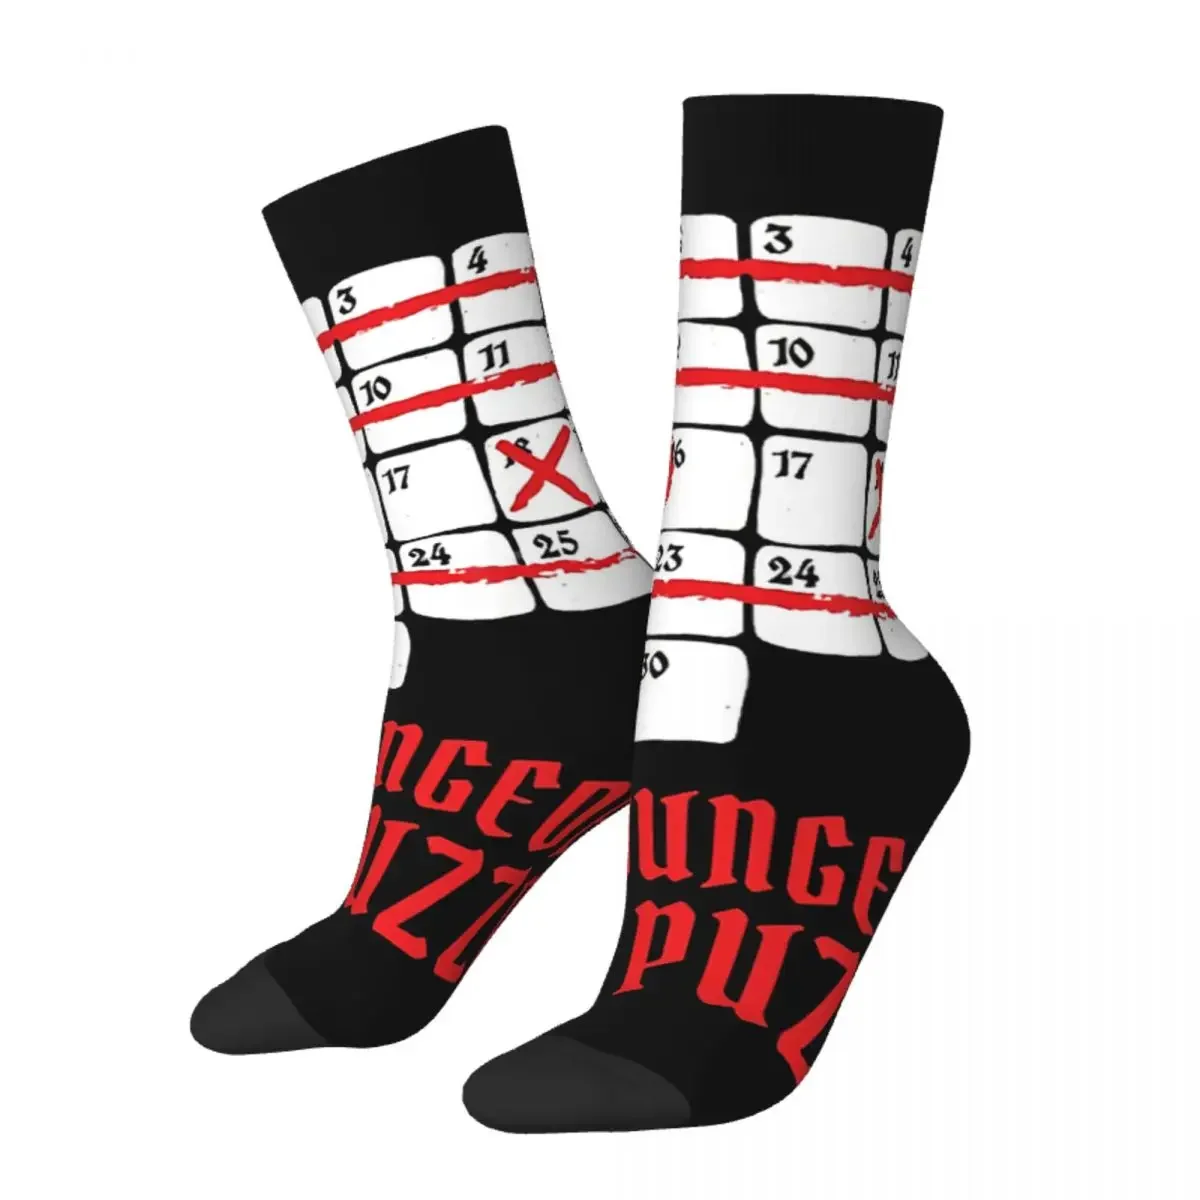 

Funny Crazy Sock for Men Dungeon Puzzle Calendar Hip Hop Harajuku DnD Game Seamless Pattern Printed Boys Crew Sock Casual Gift